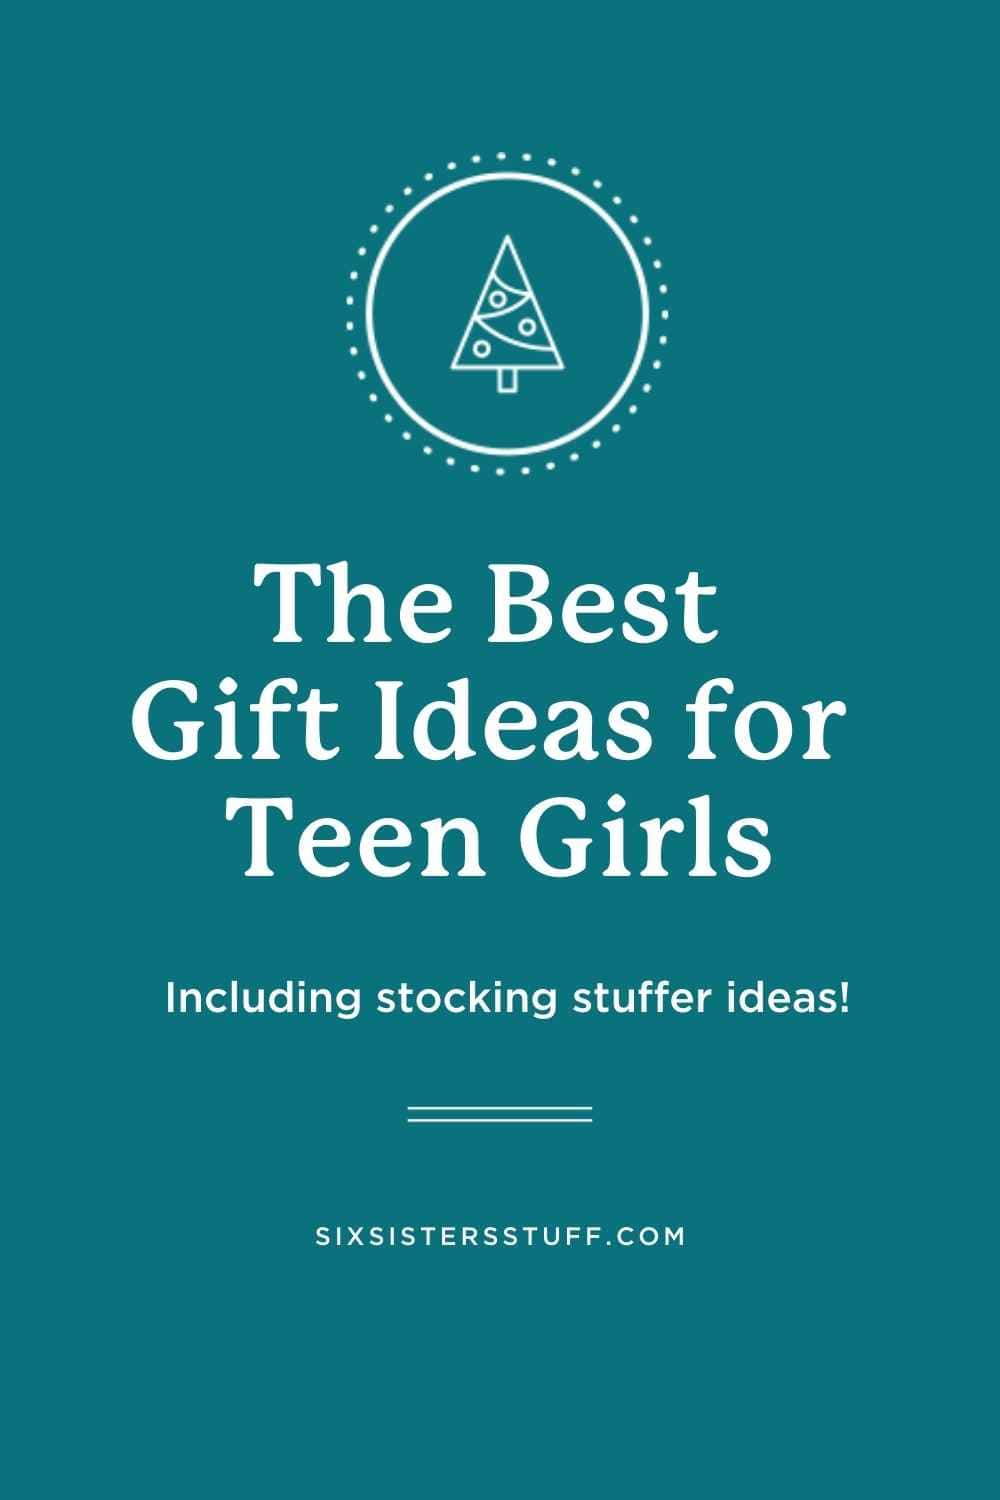 Top Gifts for 6 Year Old Girls: Everything on My Twins' Christmas Lists -  Instinctively en Vogue